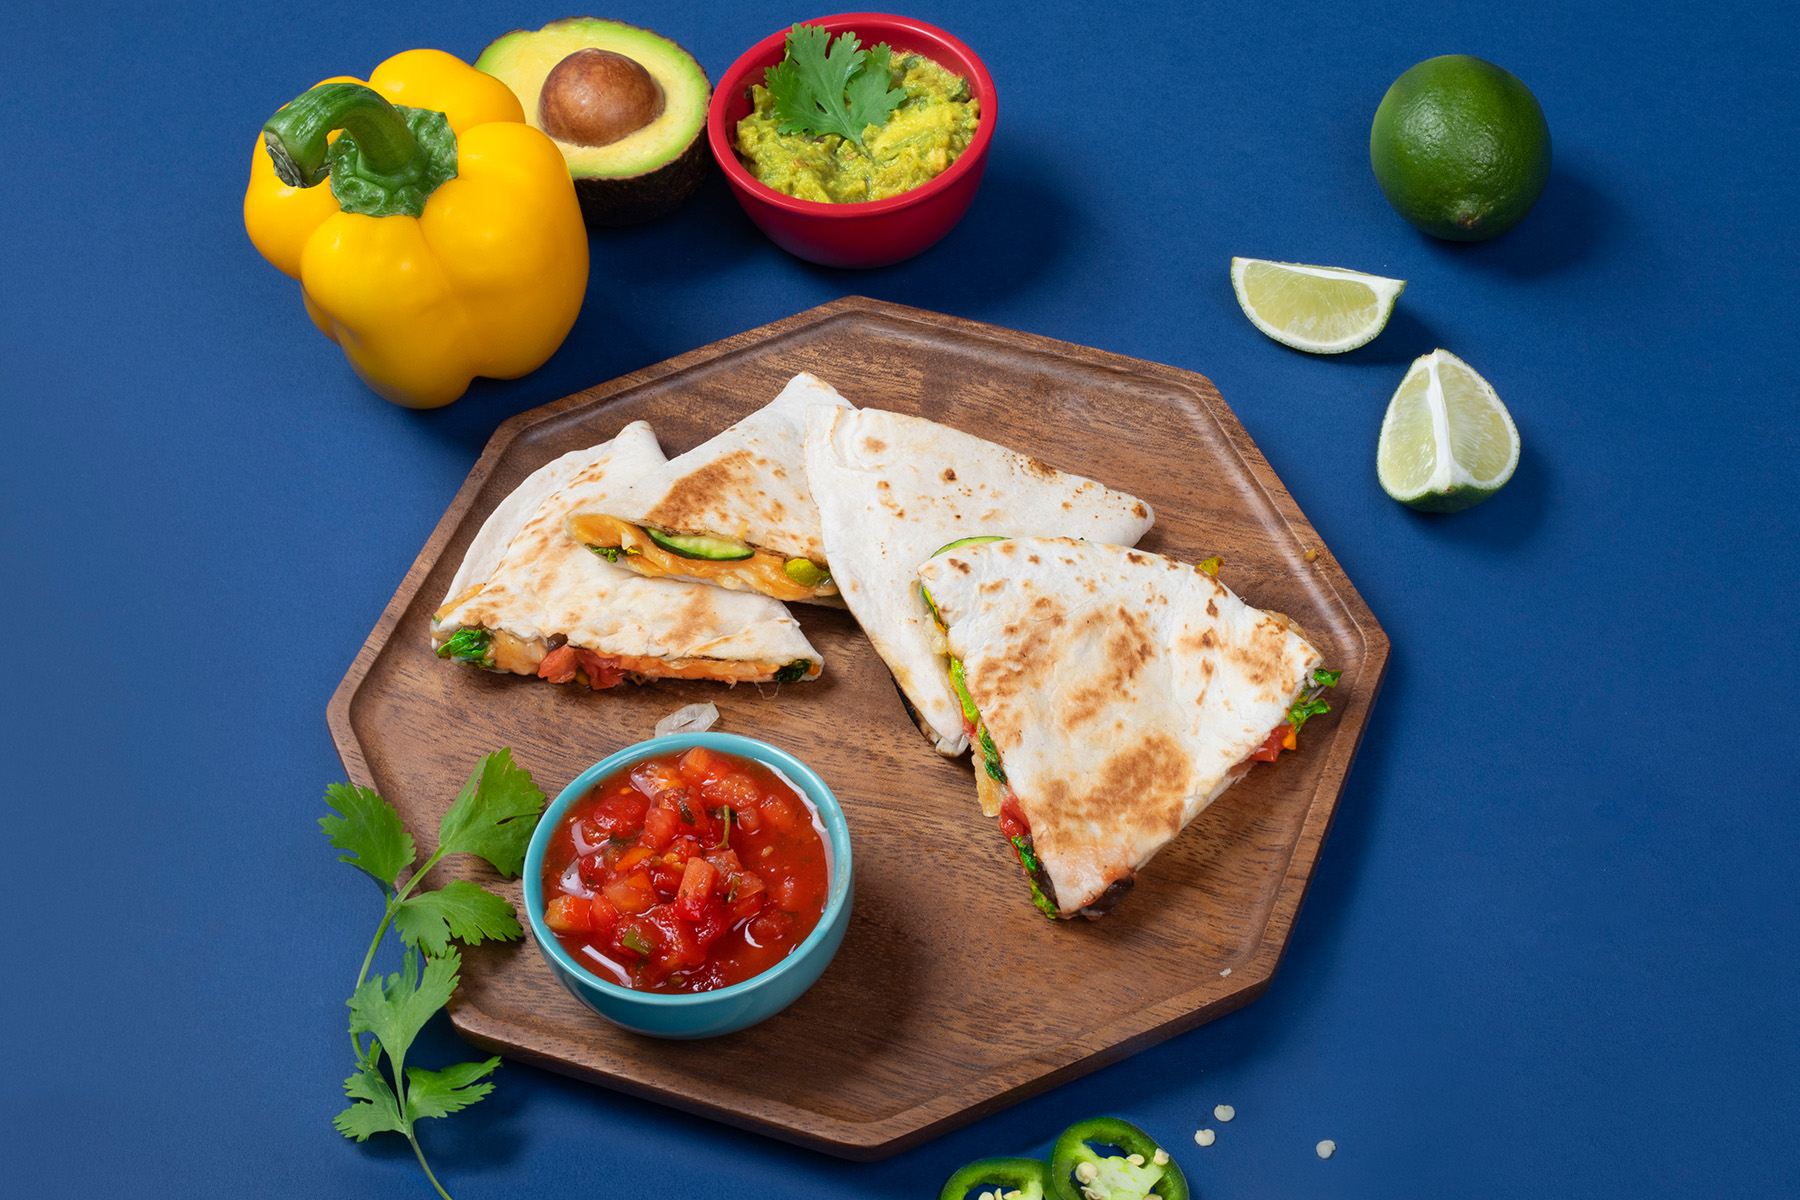 plate of vegetable quesadilla with salsa, guacamole, and lime wedges